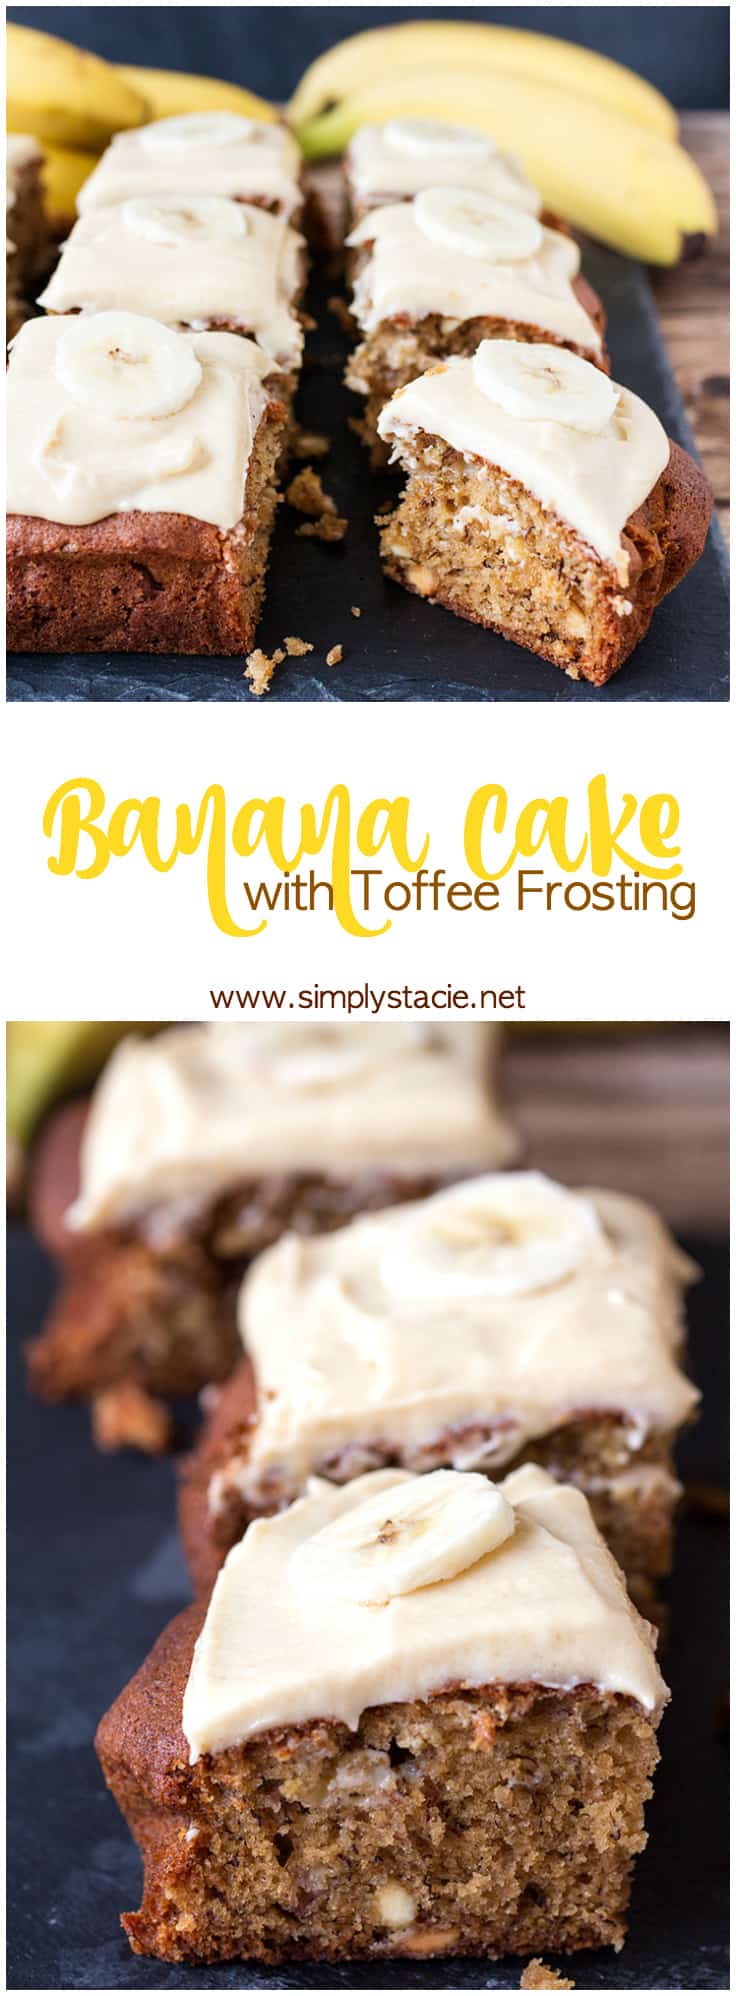 Banana Cake with Toffee Frosting - A deliciously moist banana cake with a rich toffee frosting. It's also easy to make and the perfect way to use up those brown bananas!